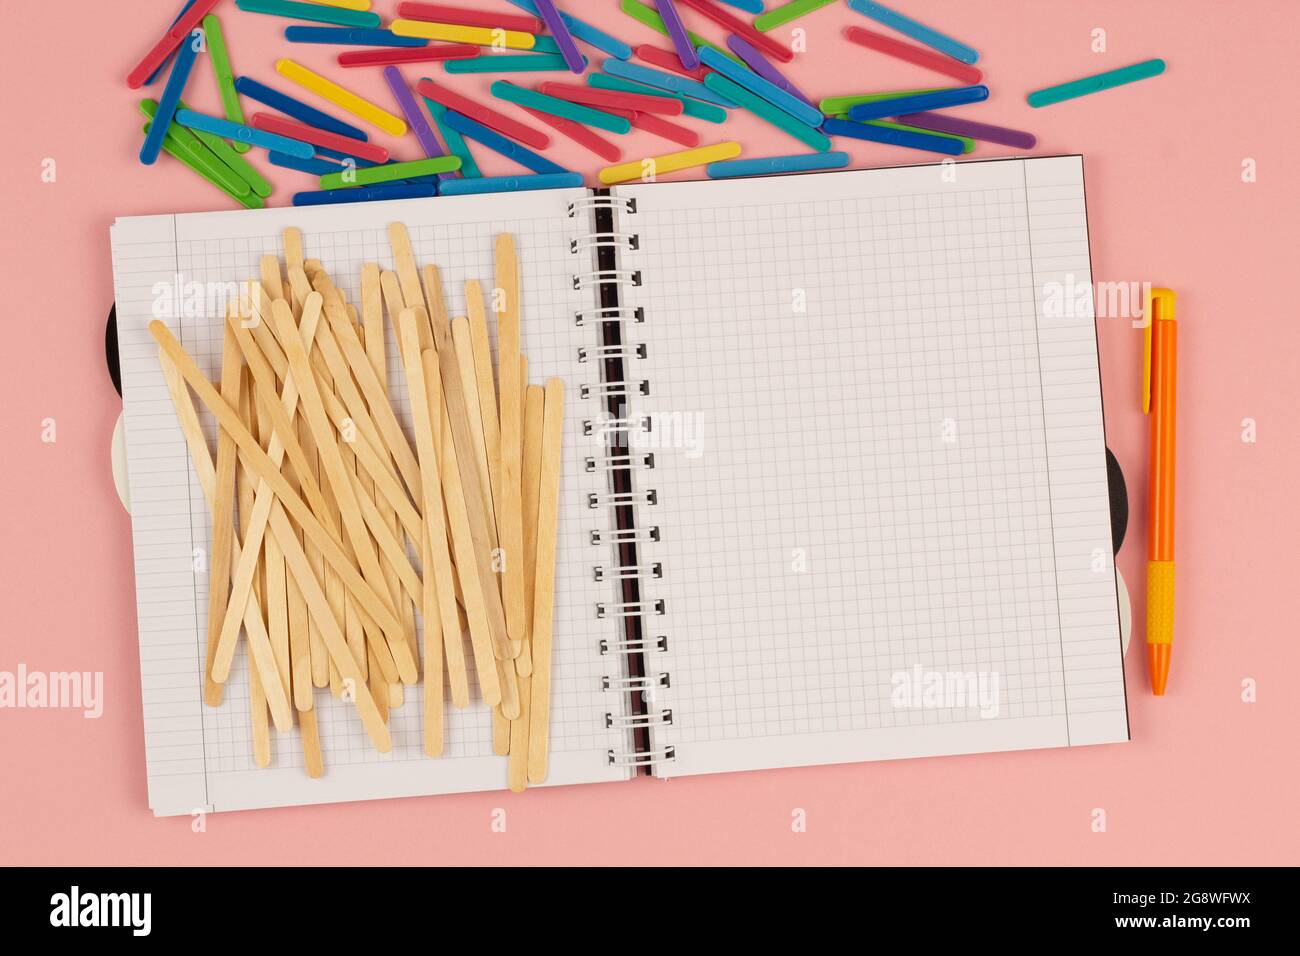 Open school squared notebook, pen, popsicle, colorful math sticks on the pink background. Blank white sheet of paper book on the table. Office Stock Photo